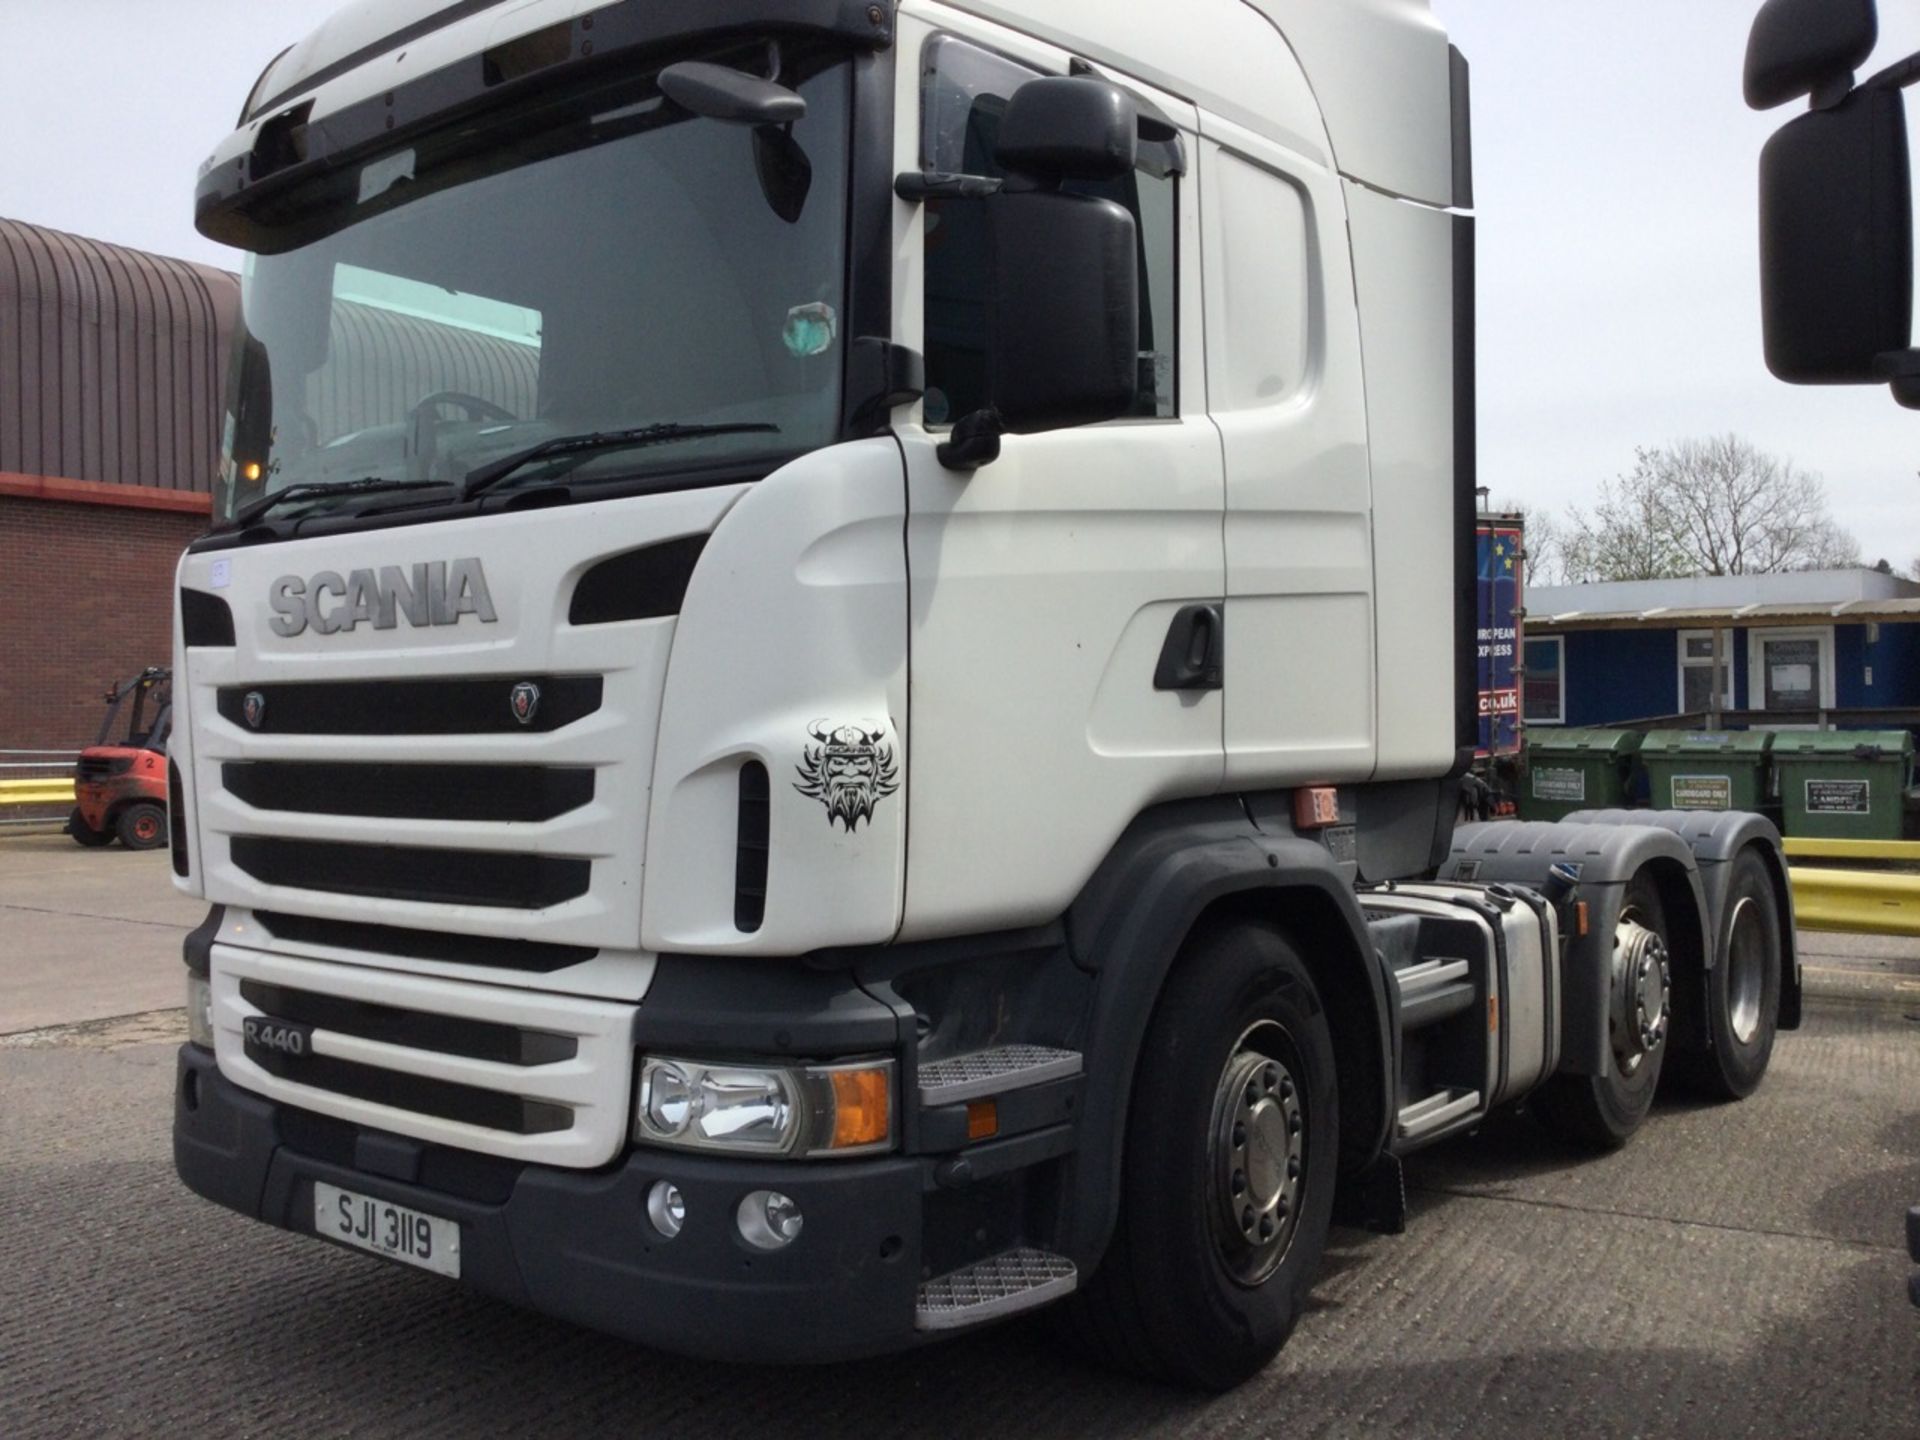 SCANIA R450 6x2 Topline Tractor Unit, with mid-lift axle, sleeper Until 30/04/24 Registration numbe - Image 2 of 4